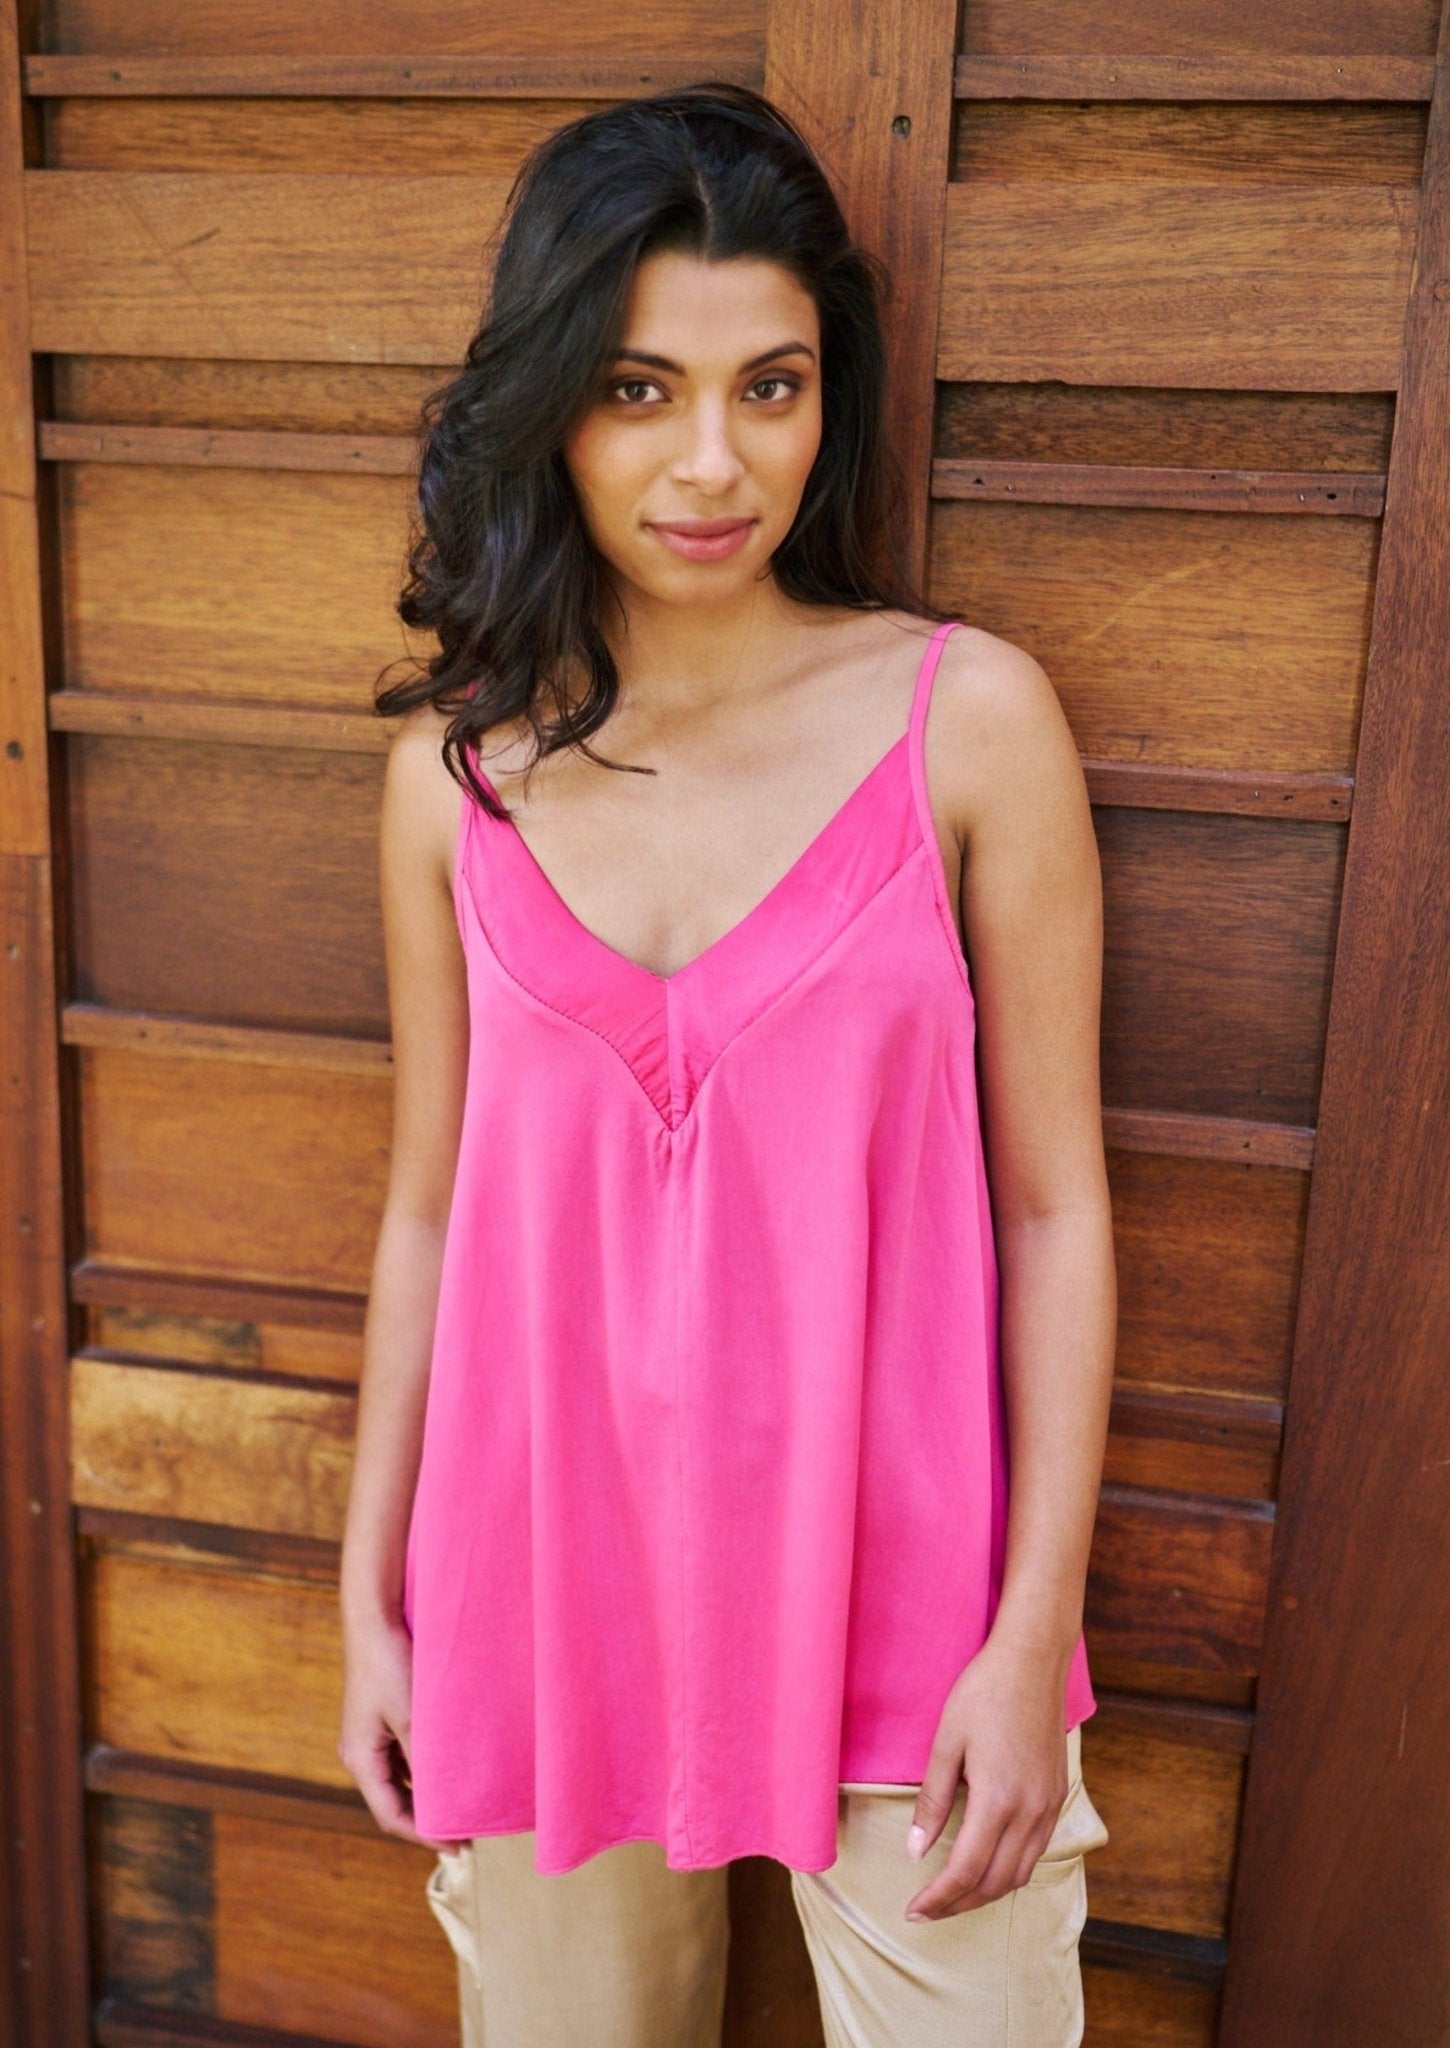 Socialite Solid Satin Camisole Top in Pink